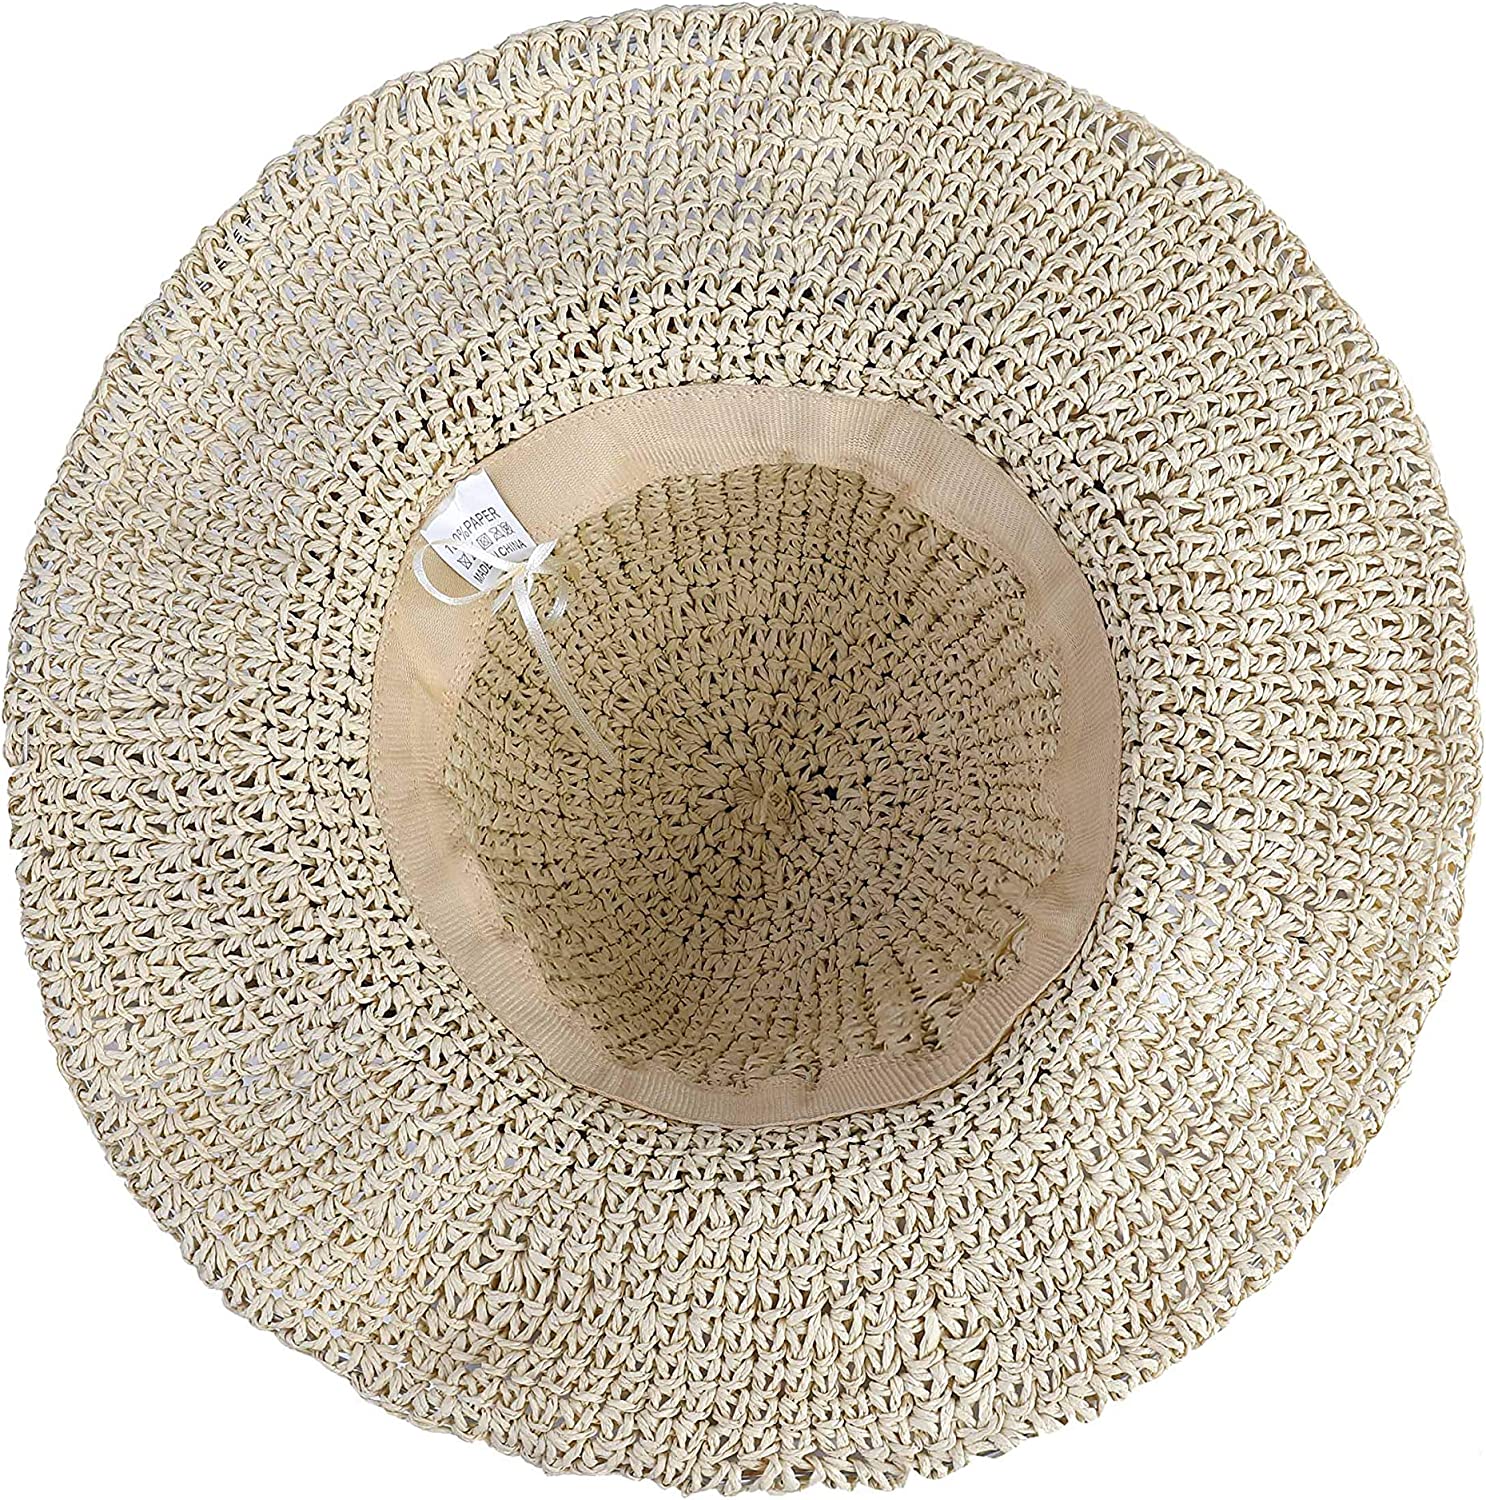 Women Straw Hat Wide Brim Beach Sun Cap Foldable Large Lady Floppy 100% Natural Paper Braided for Travel Decoration Summer Vacation Soft Lightweight and Breathable (Beige)